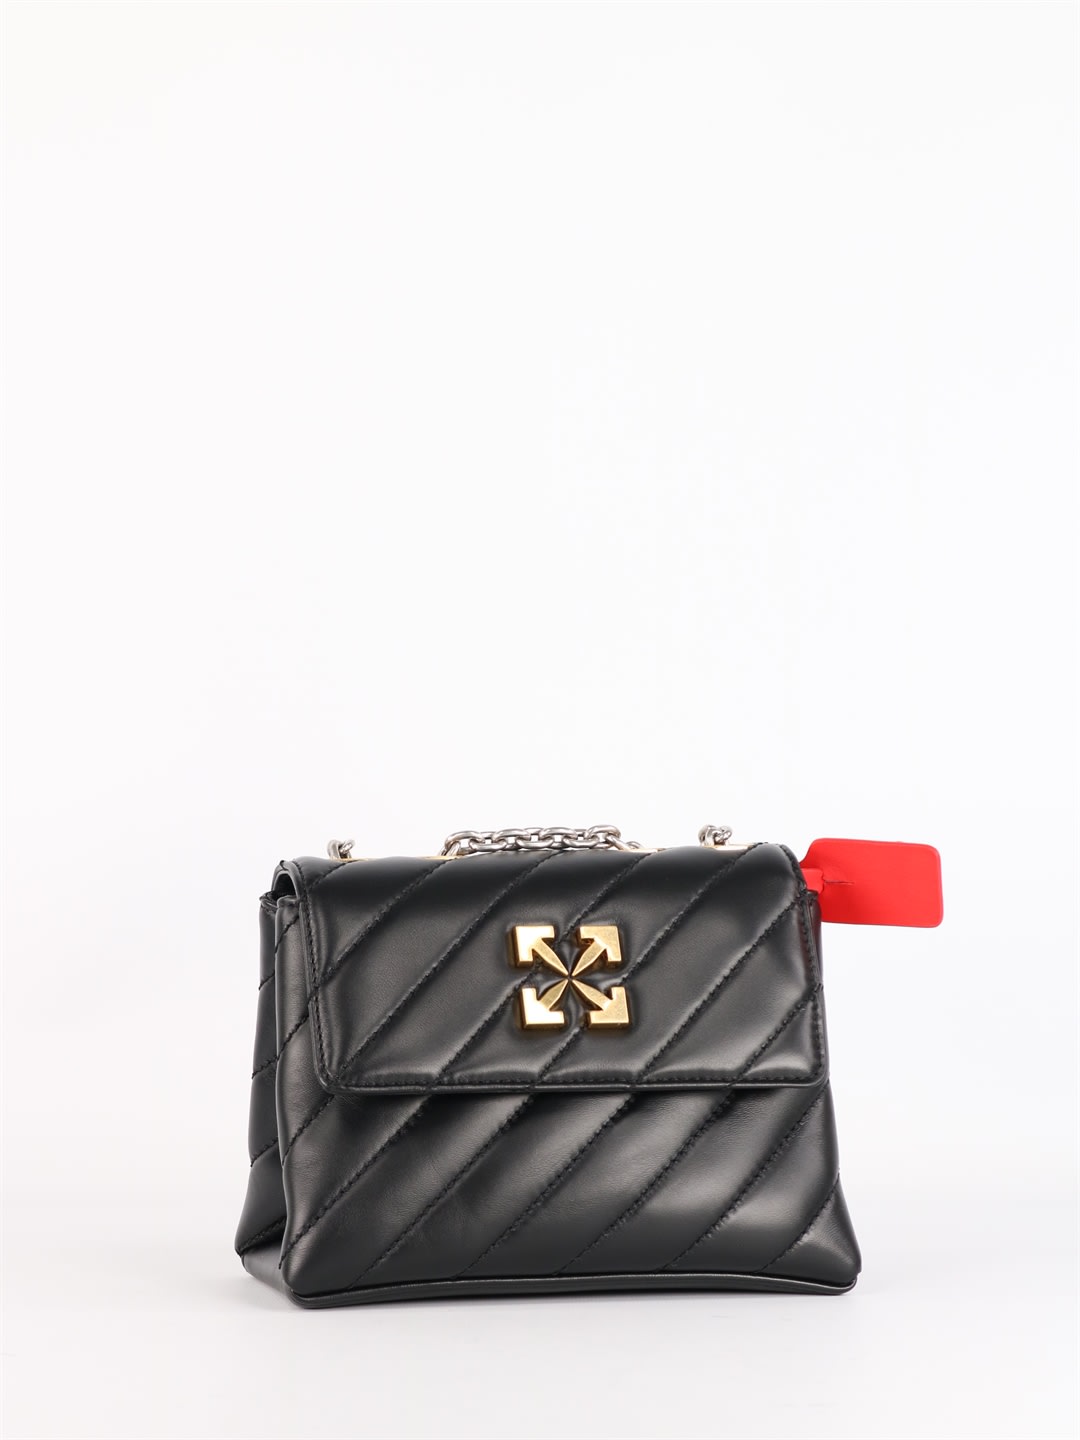 Off-White Medium Bag In Black Leather With Logo